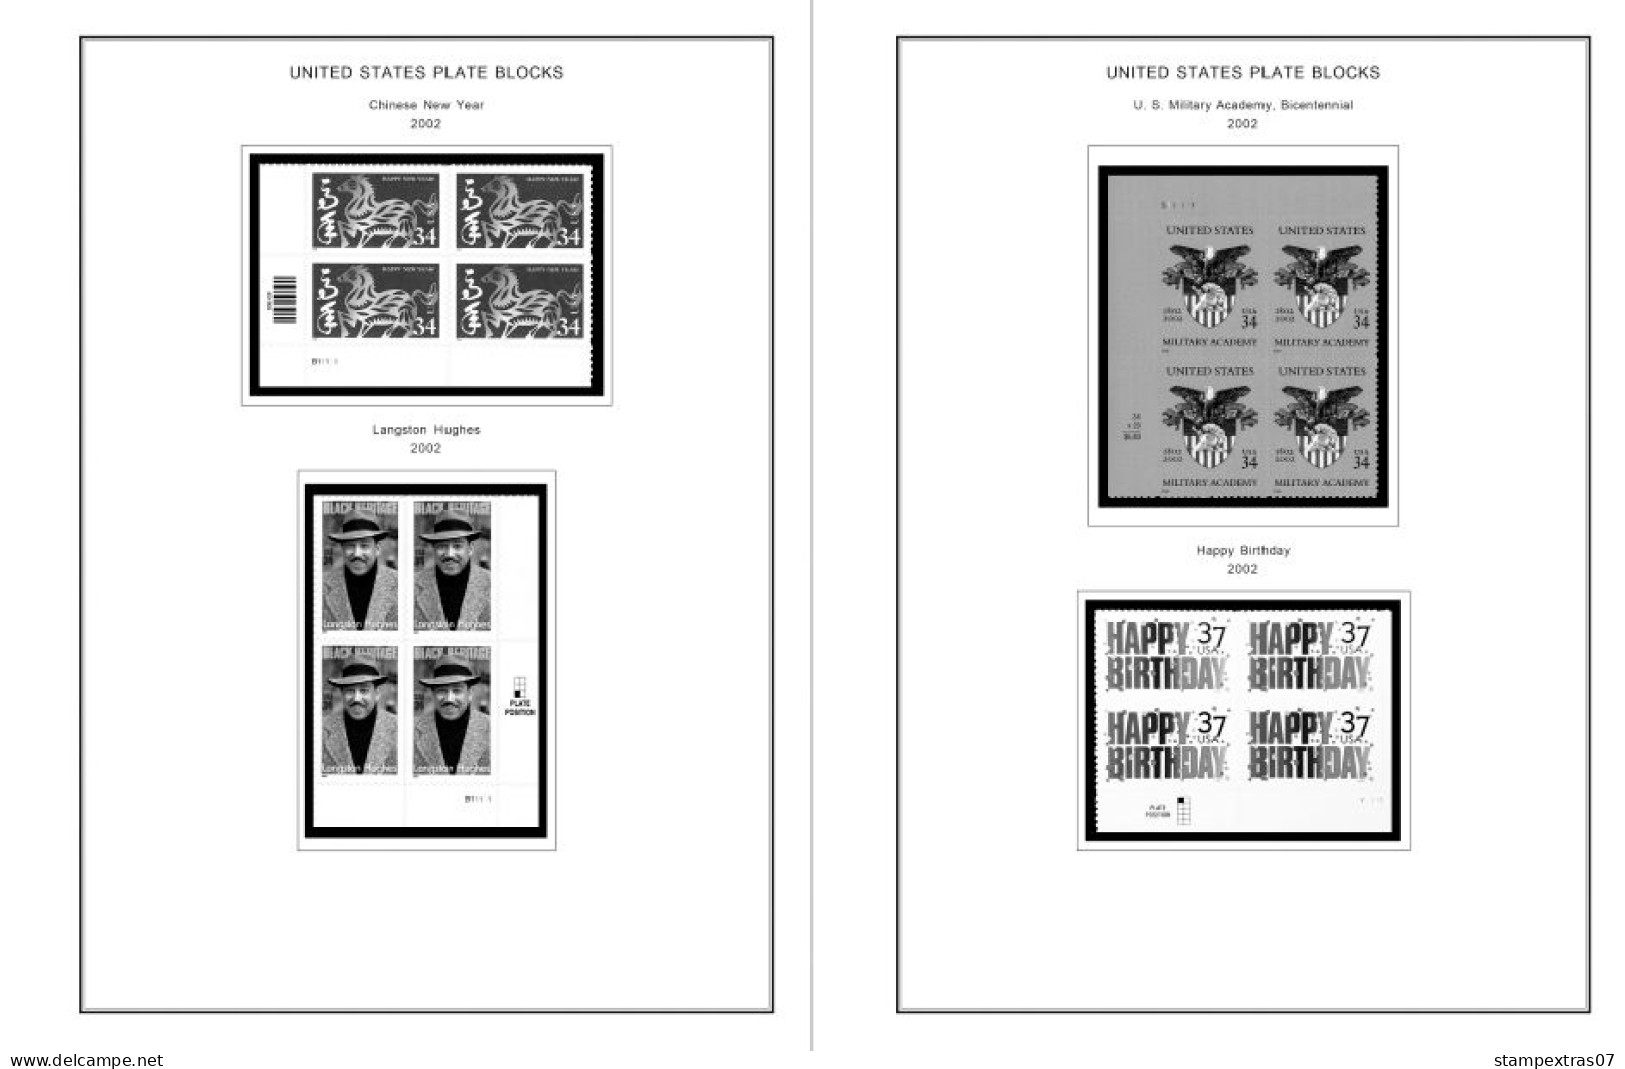 US 2000-2005 PLATE BLOCKS STAMP ALBUM PAGES (68 b&w illustrated pages)